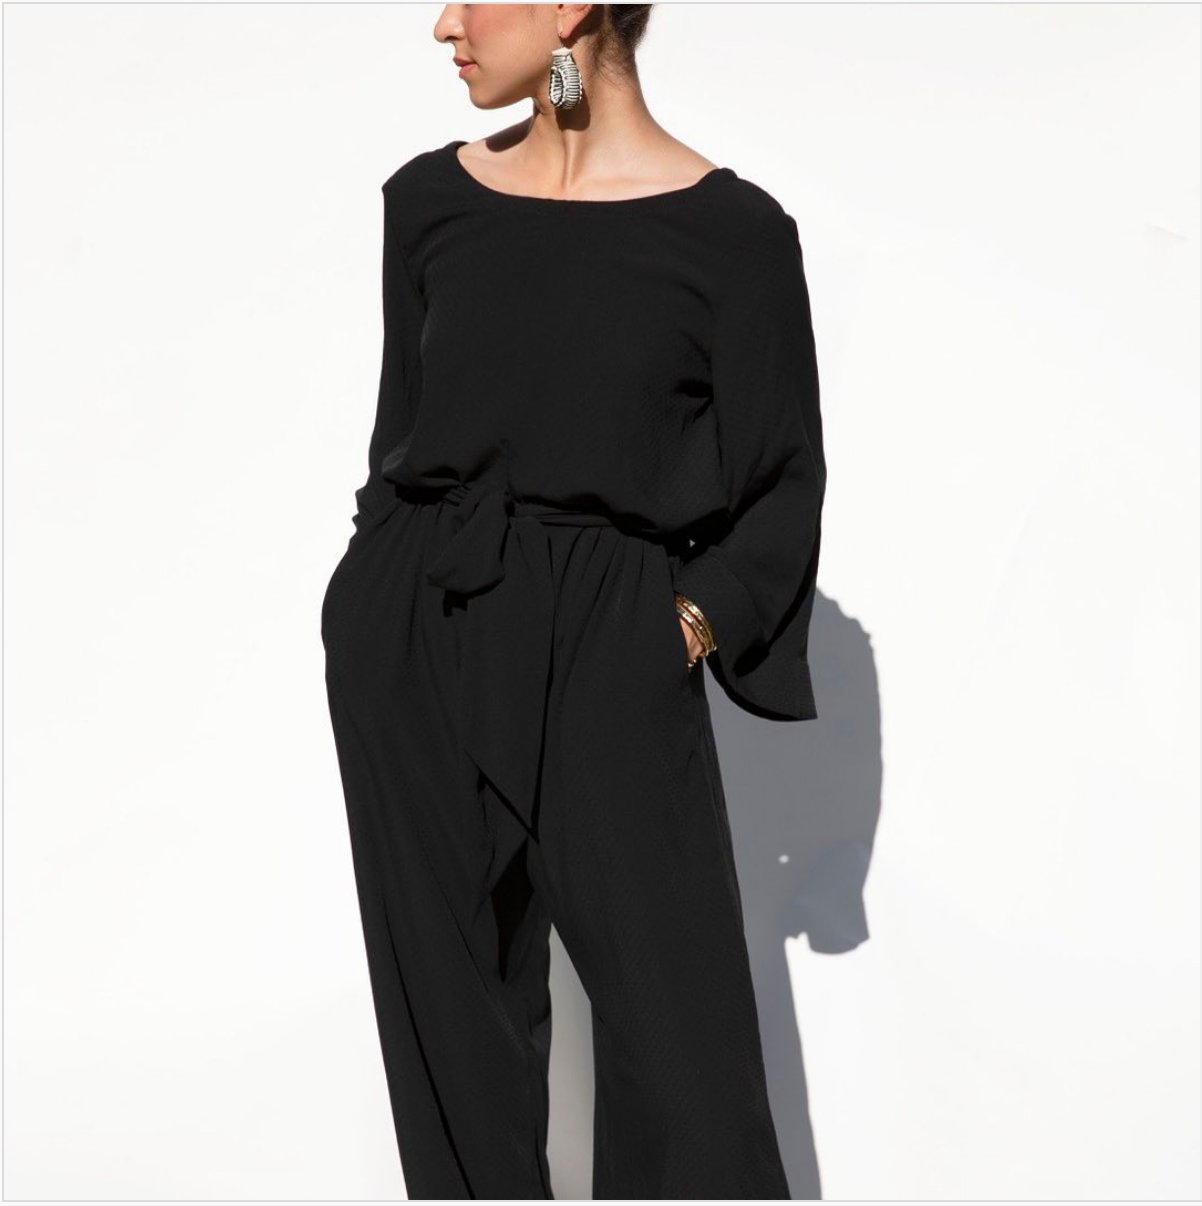 Cura Collection "Tomoko" Jumpsuit